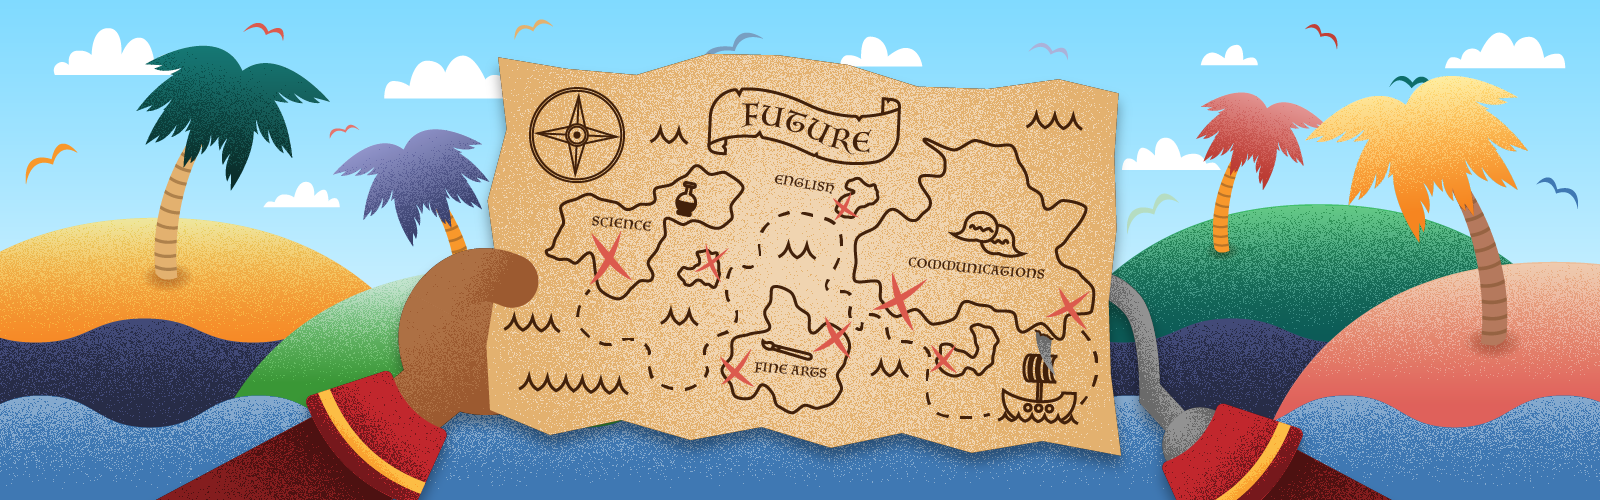 Graphic of a treasure map for the future containing different areas of study